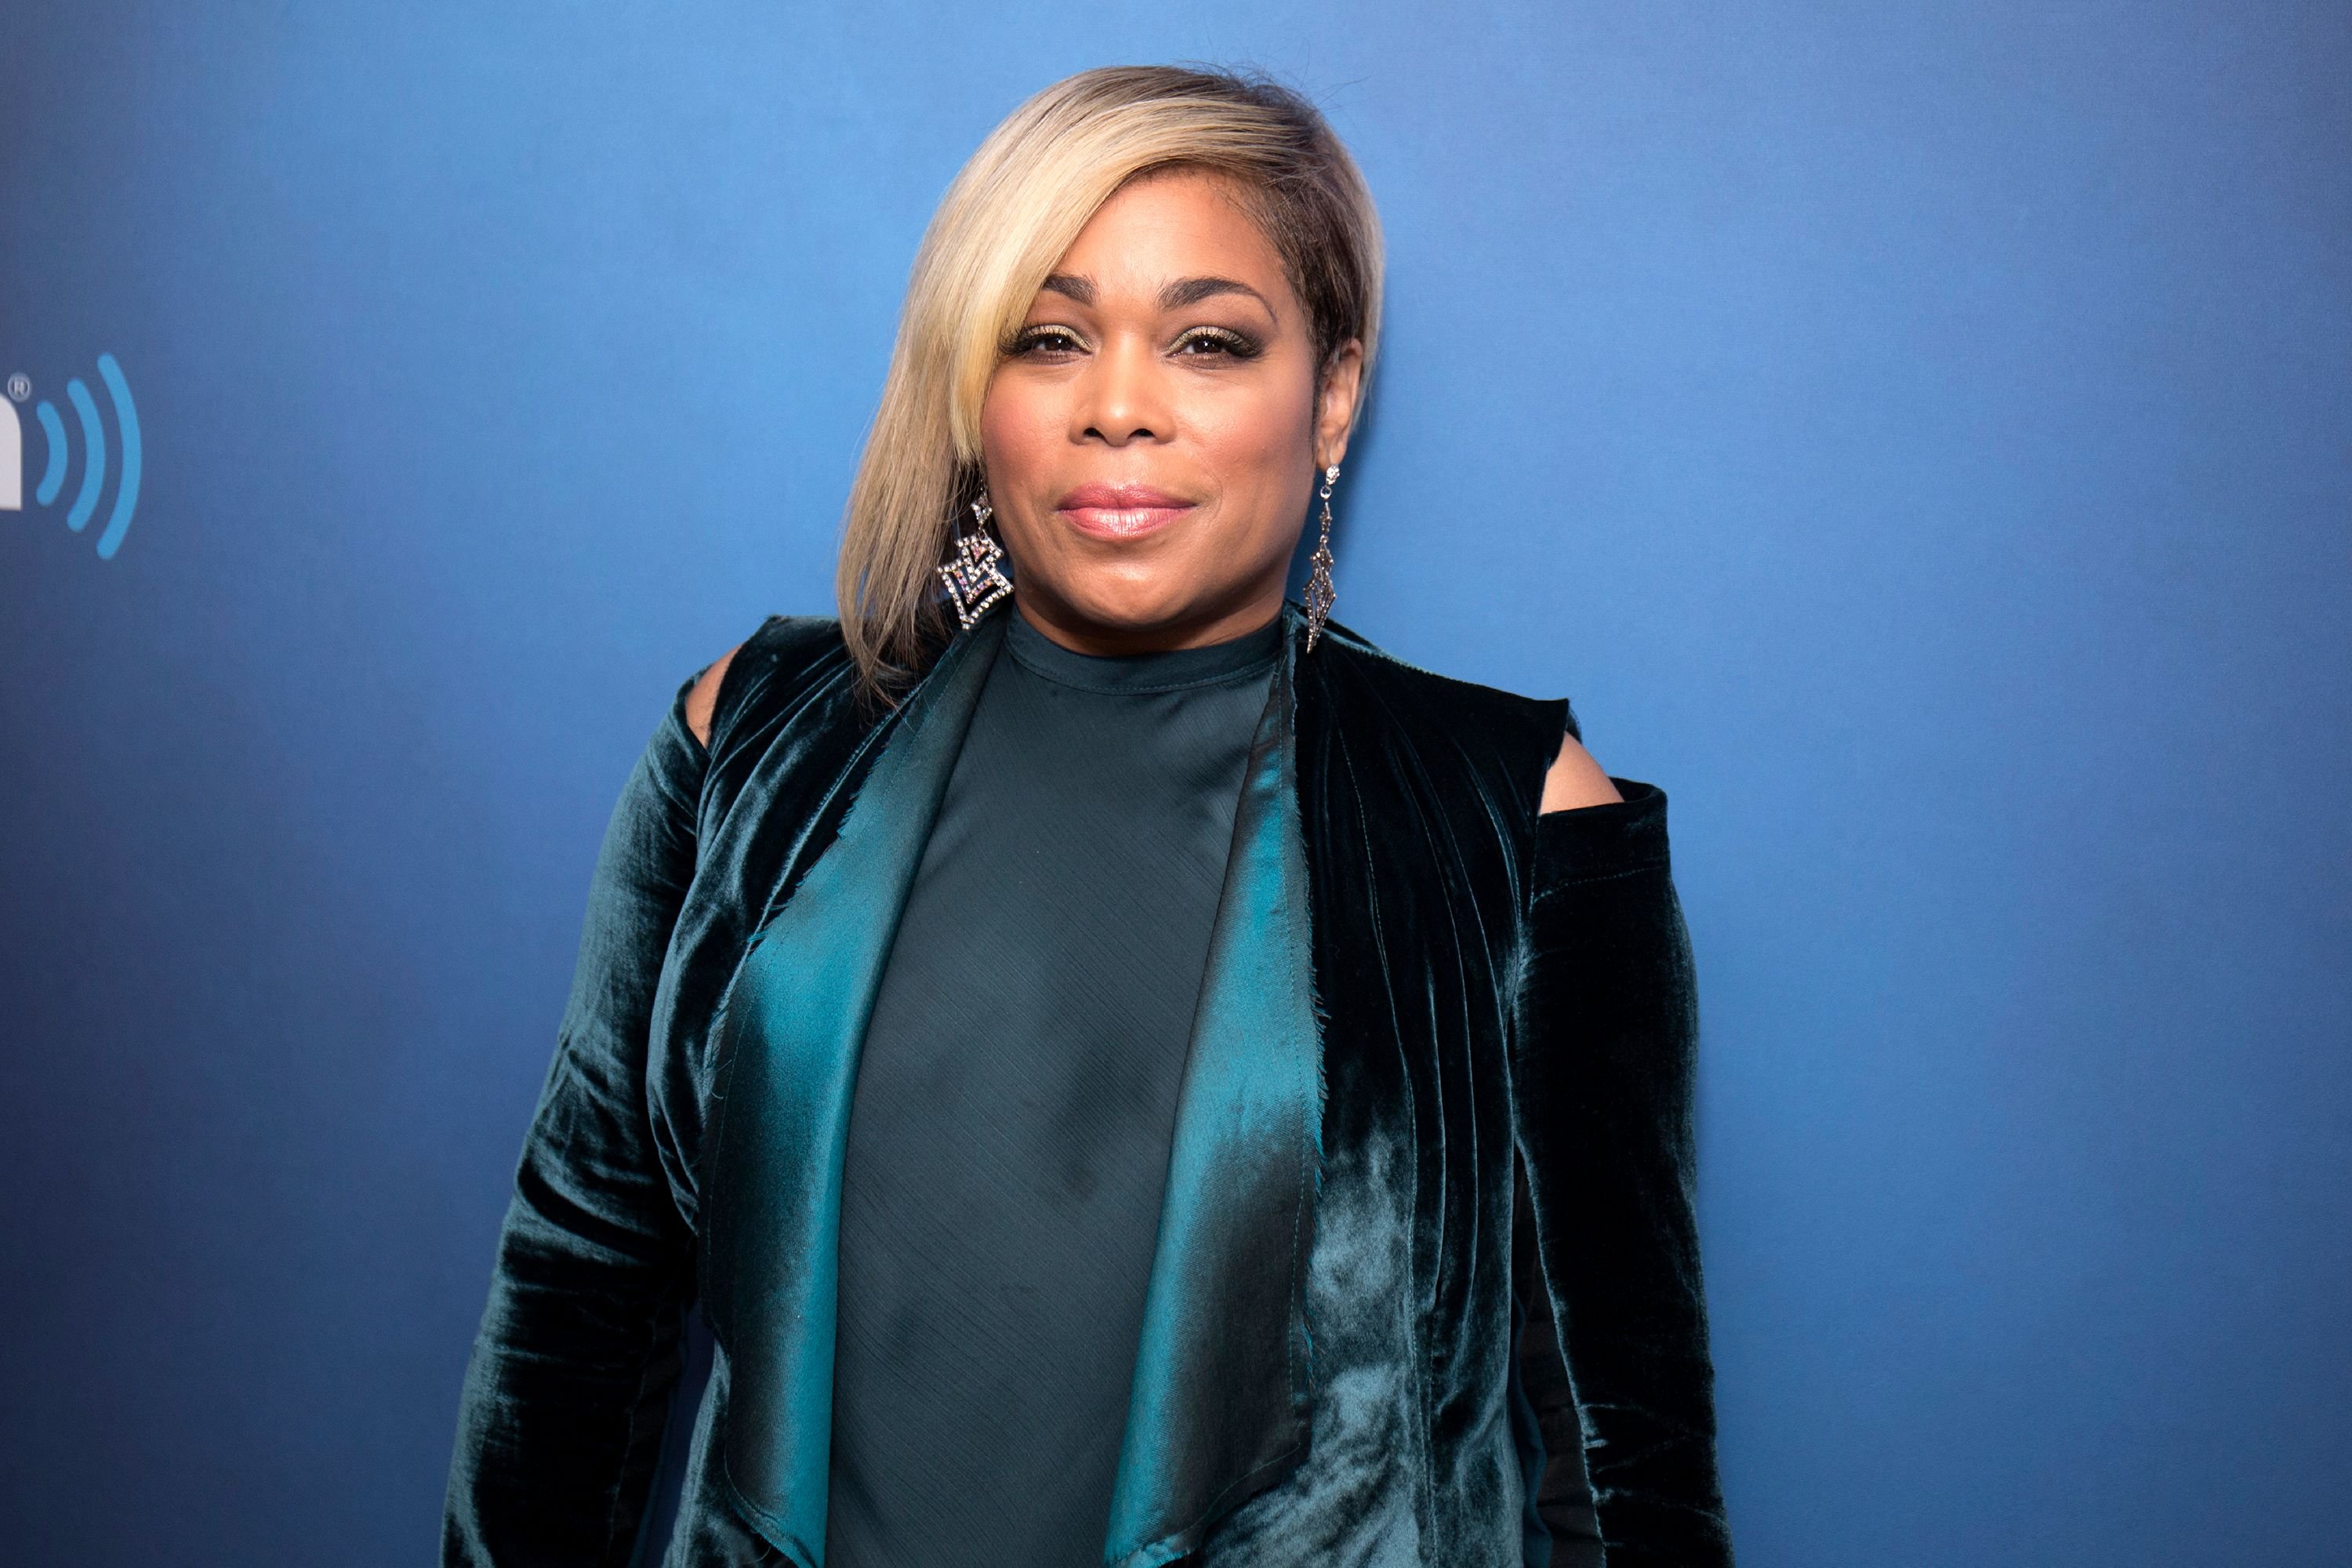 Tionne 'T-Boz' Watkins at the SiriusXM Studios on September 12, 2017, in New York City. | Source: Getty Images